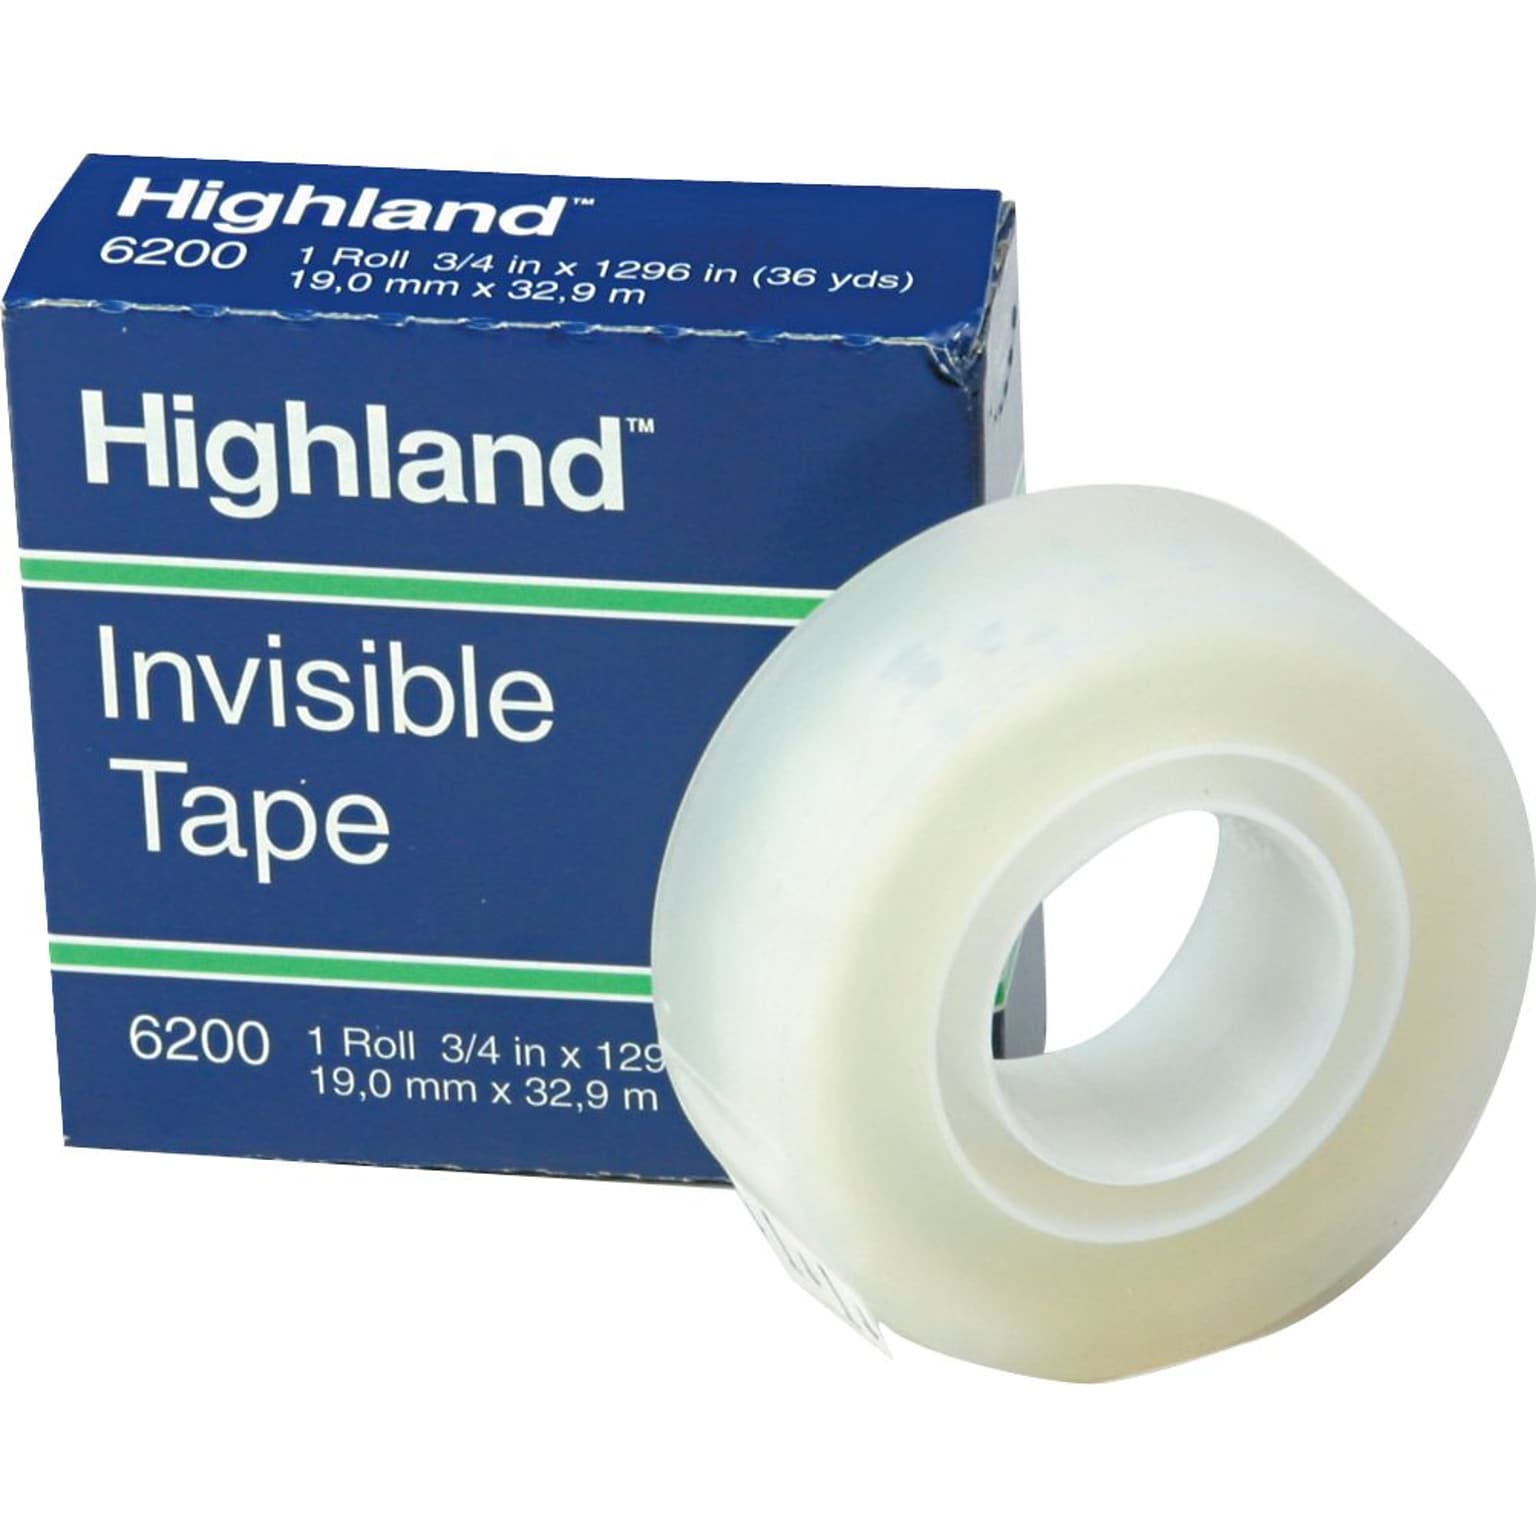 Highland™ Invisible Tape, 3/4 x 36 yds., 144/CT (6200341296CT)